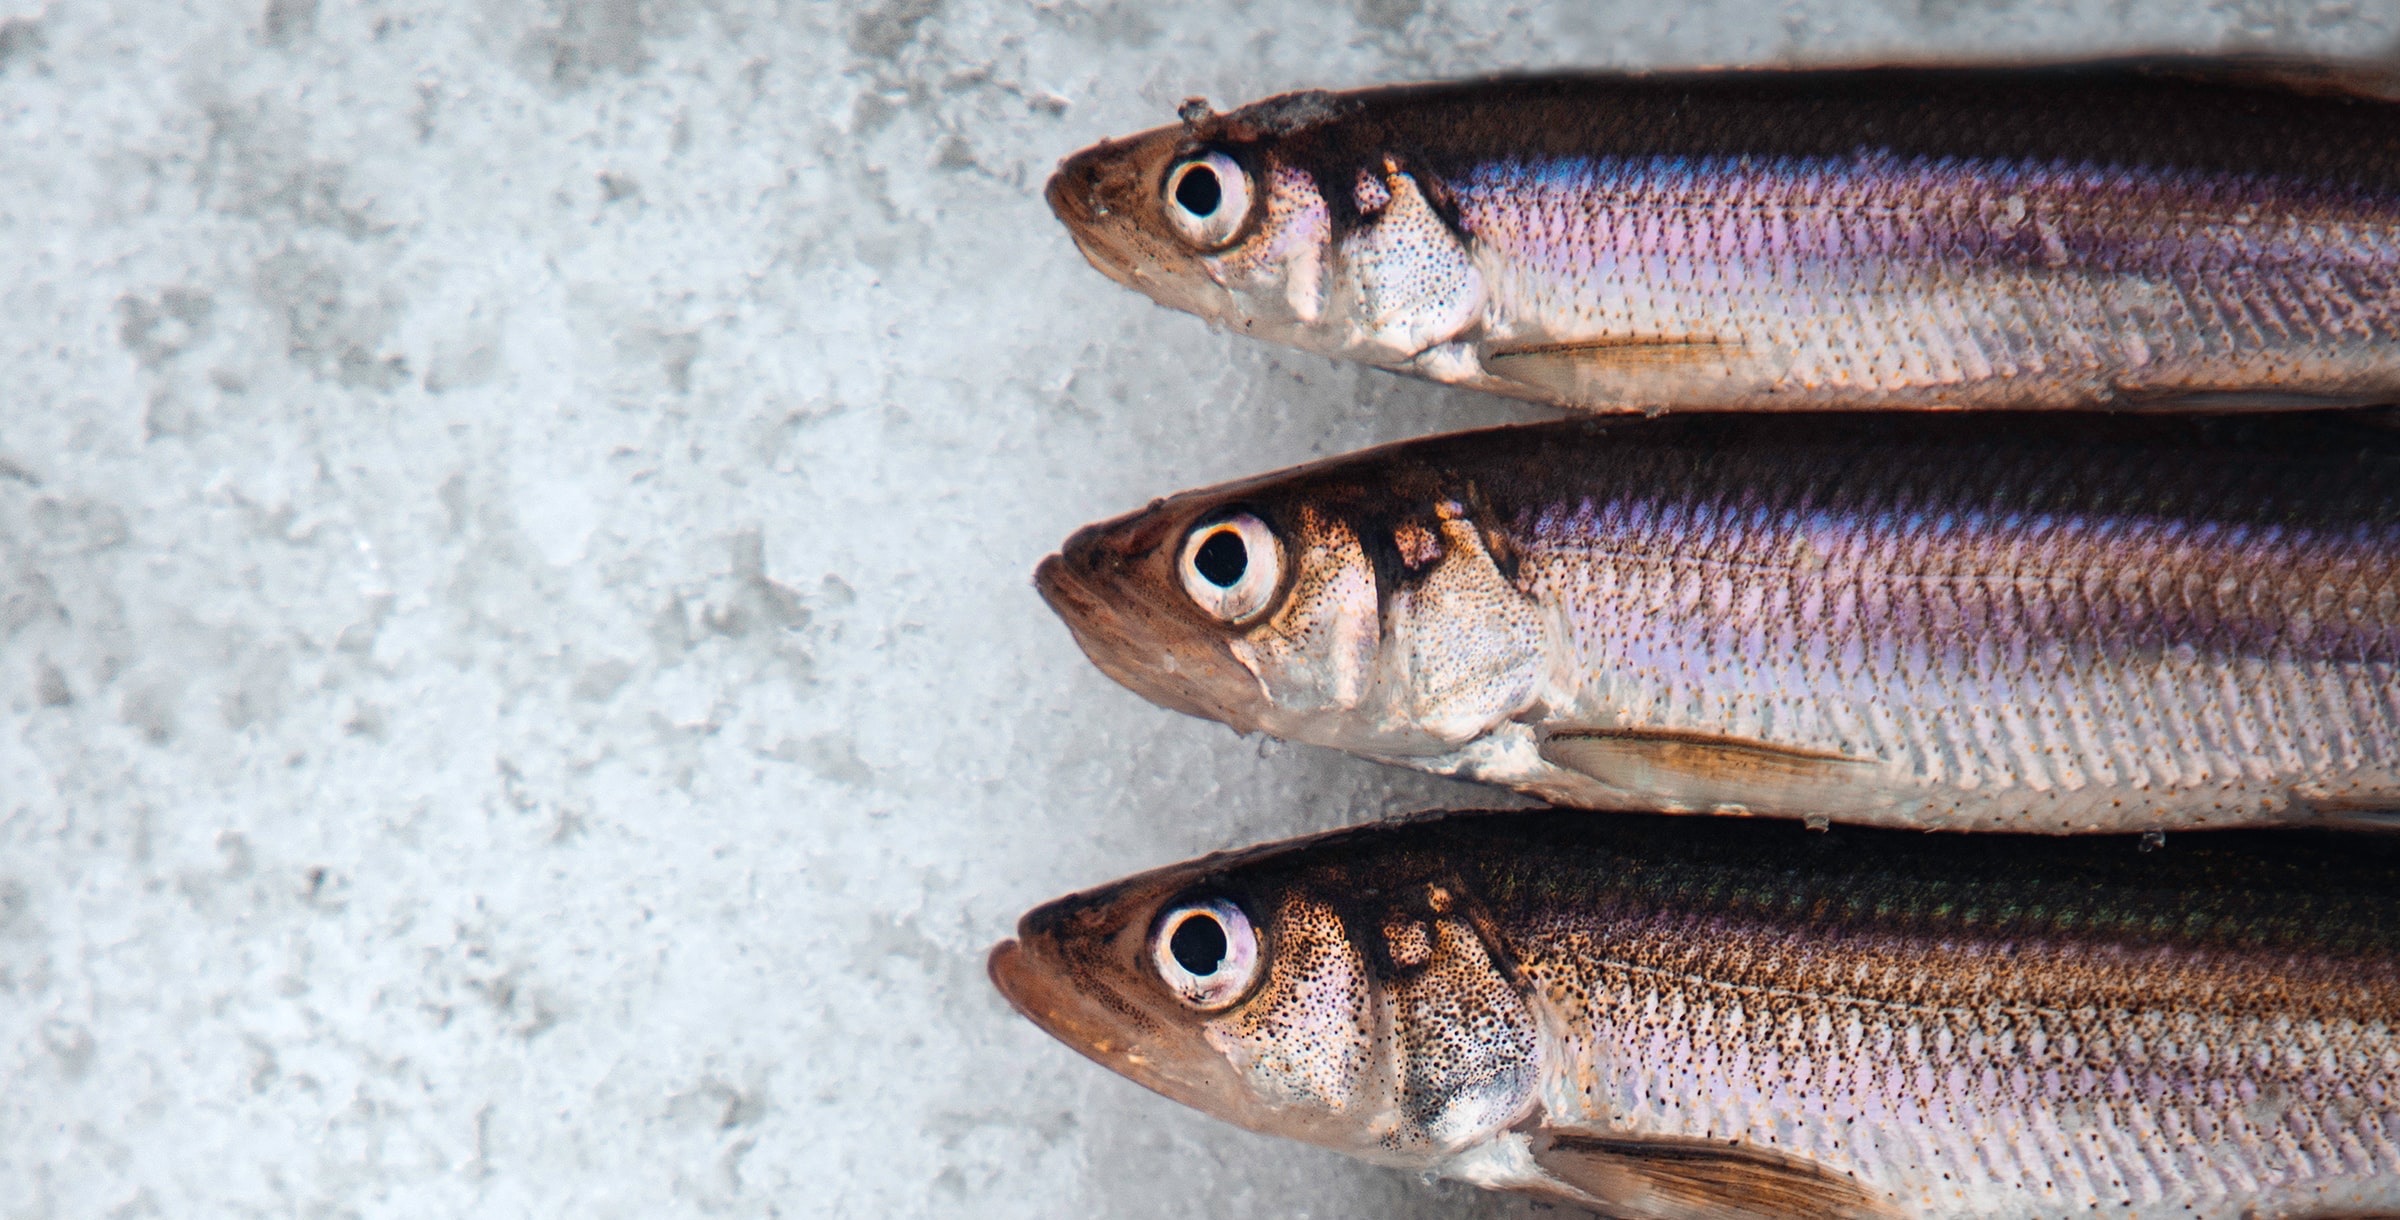 Image of mullet fish